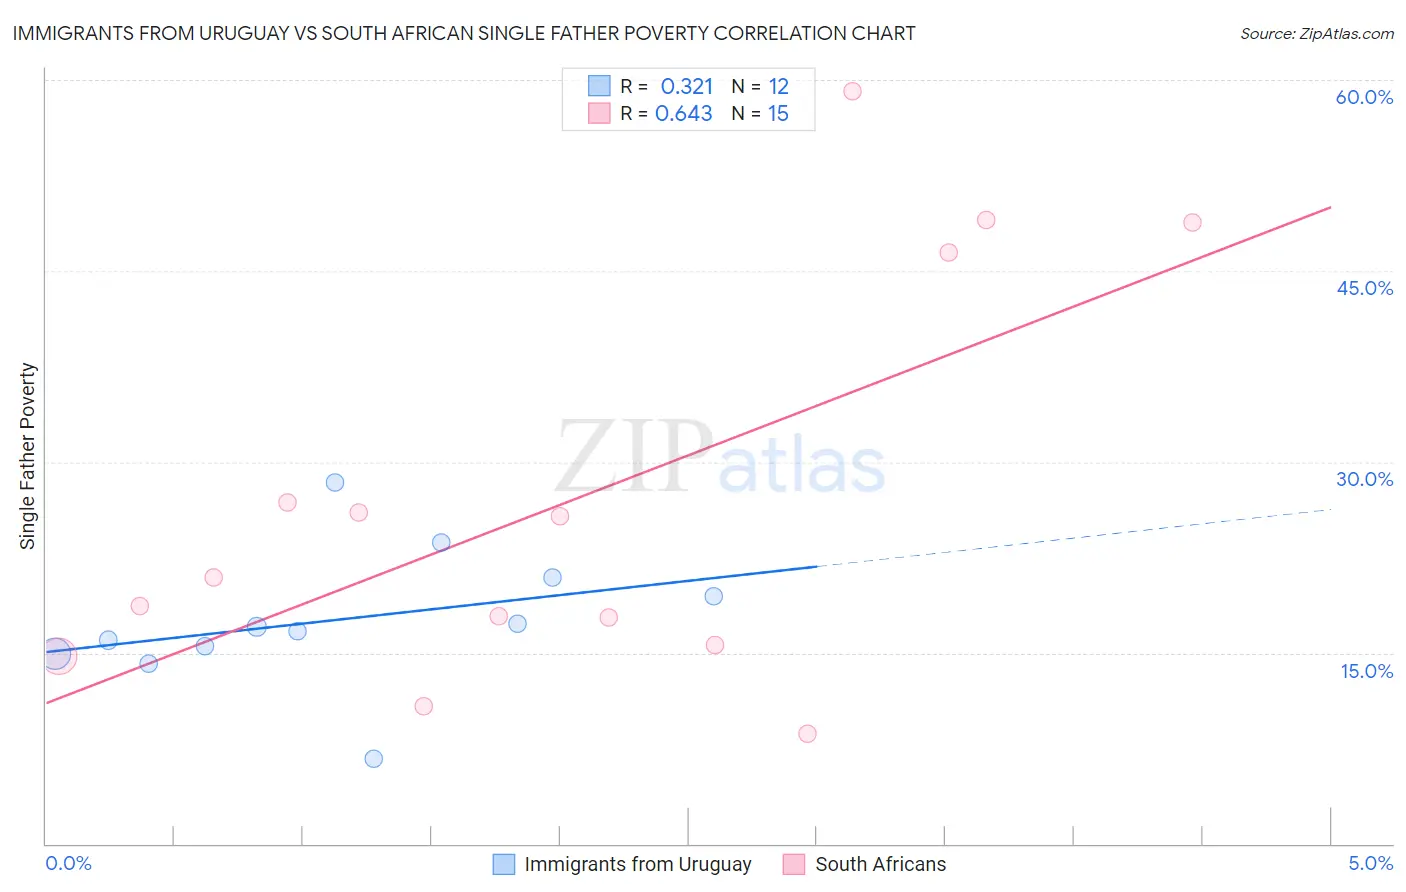 Immigrants from Uruguay vs South African Single Father Poverty